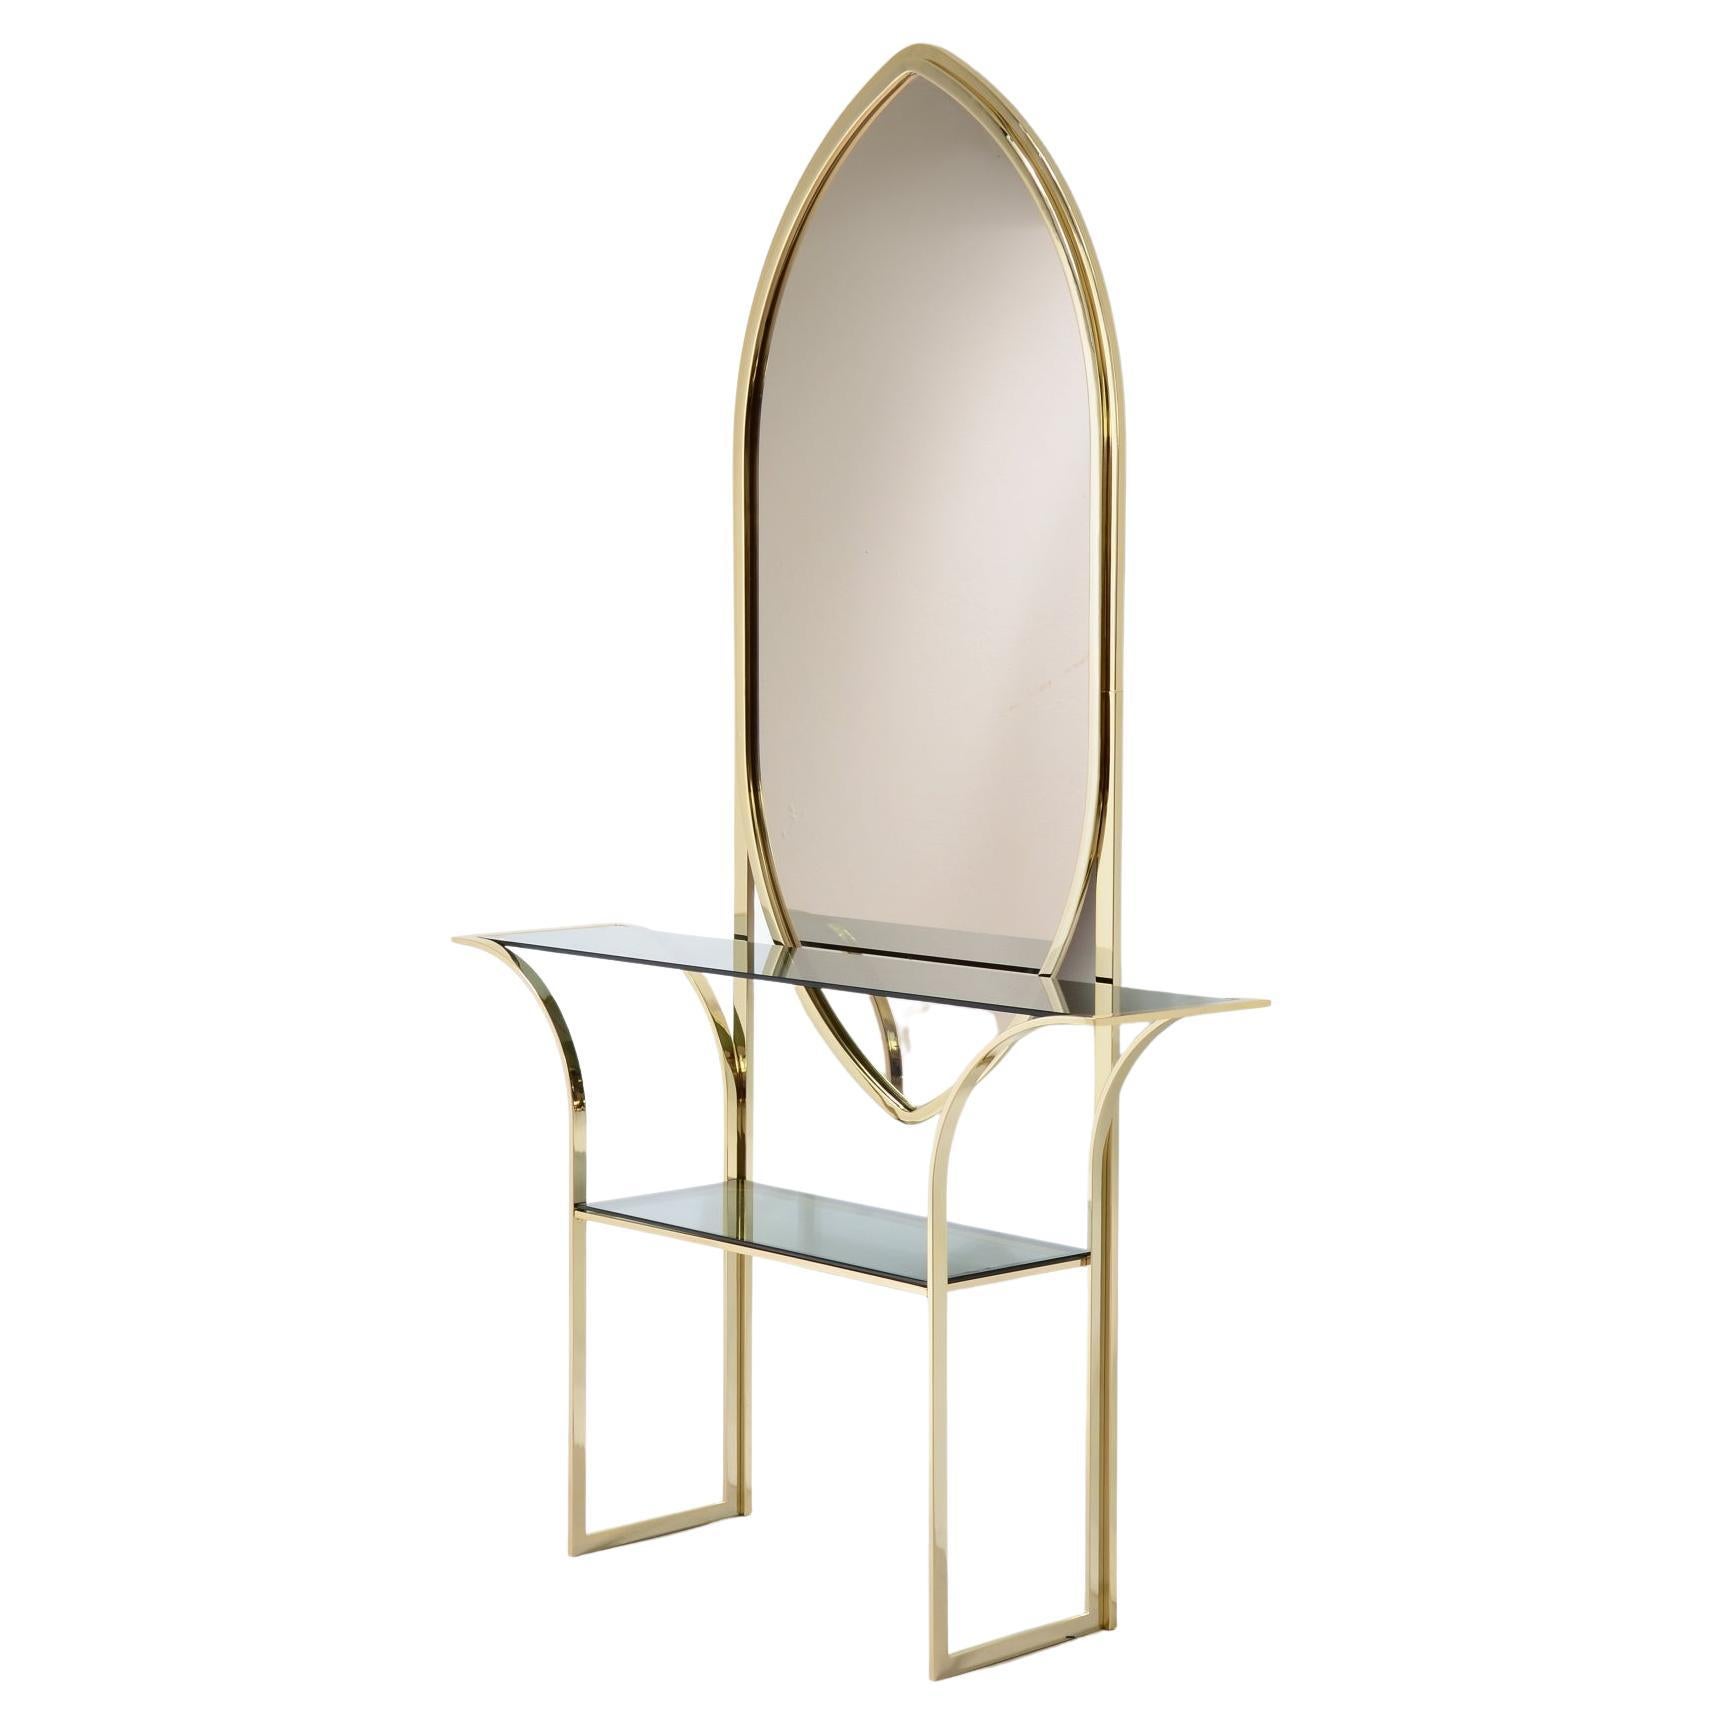 Curved brass console table with mirror 